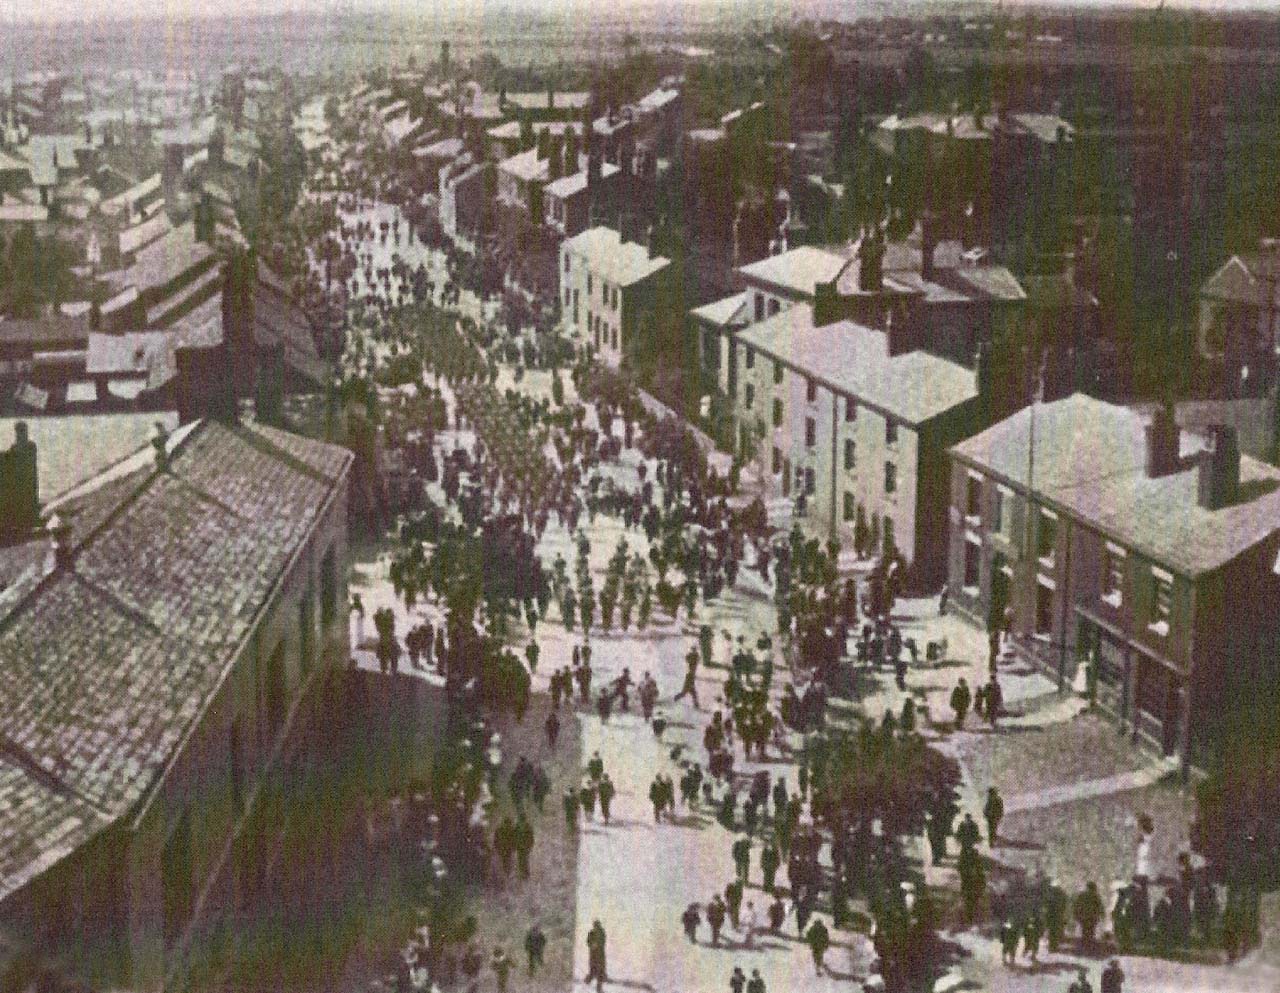 Church Parade, from St Peters Tower, c1903 Photographs kindly supplied by Newton library